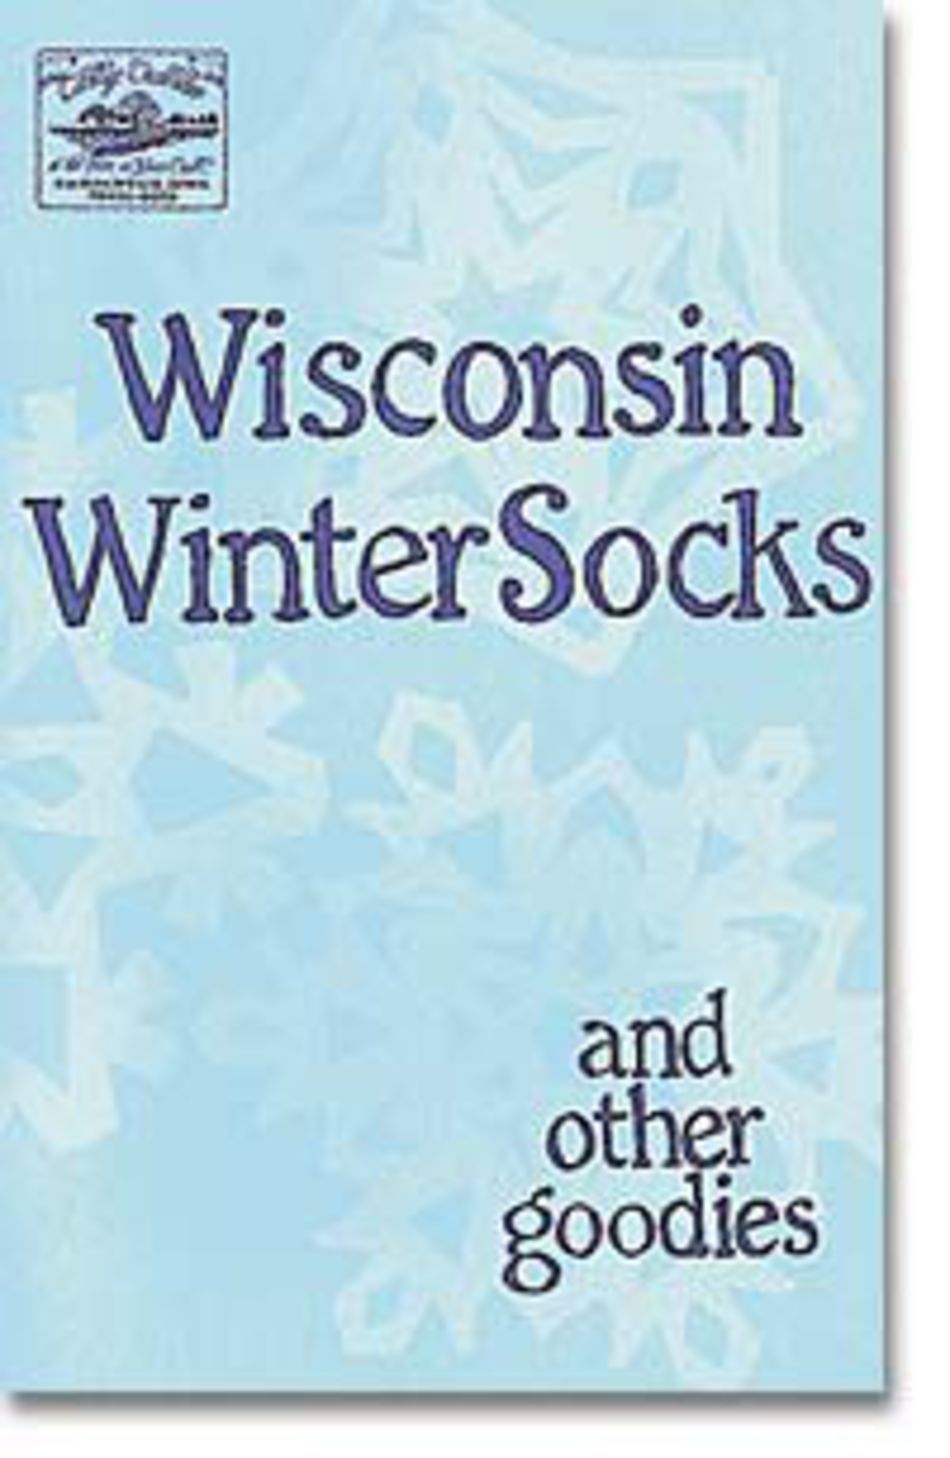 Knitting Books Wisconsin Winter Socks and Other Goodies